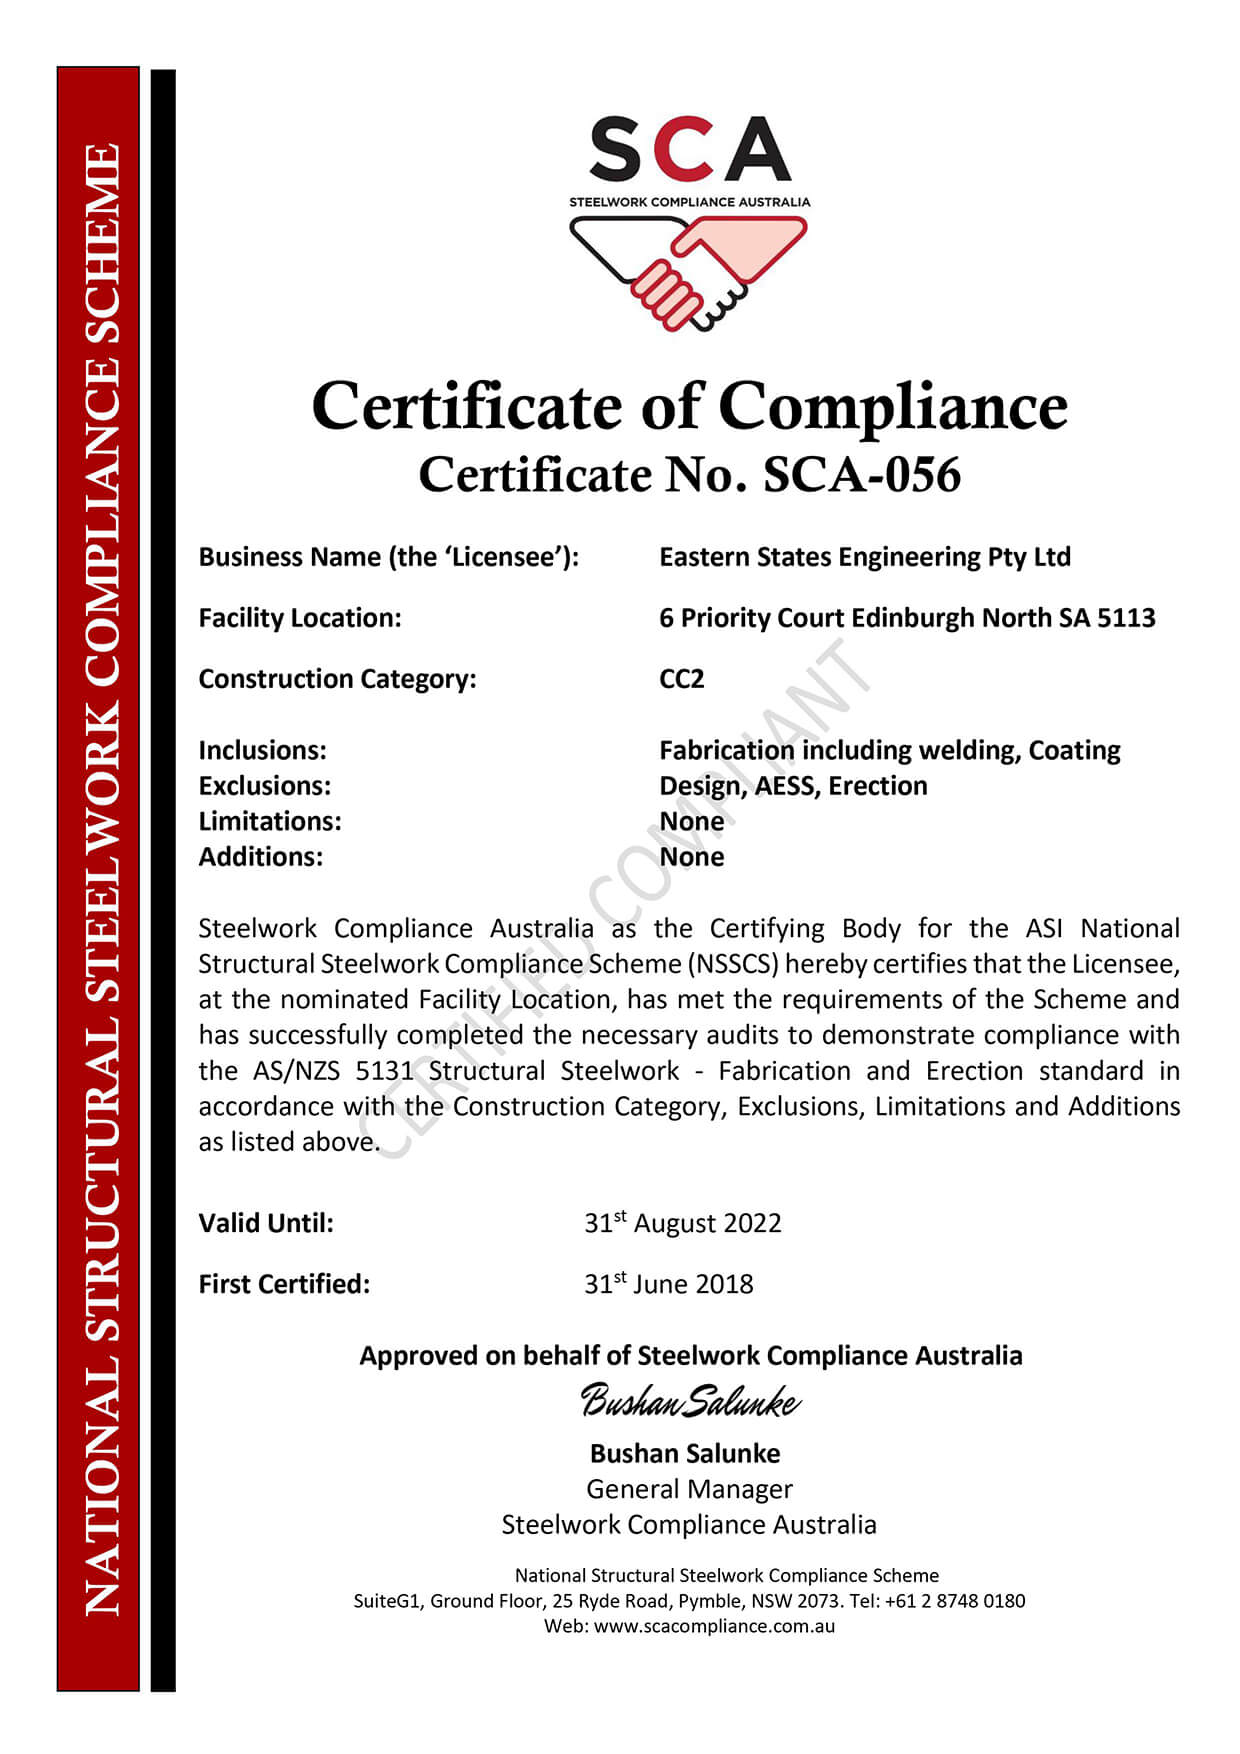 sca 056 cc2 certificate of compliance ese adelaide